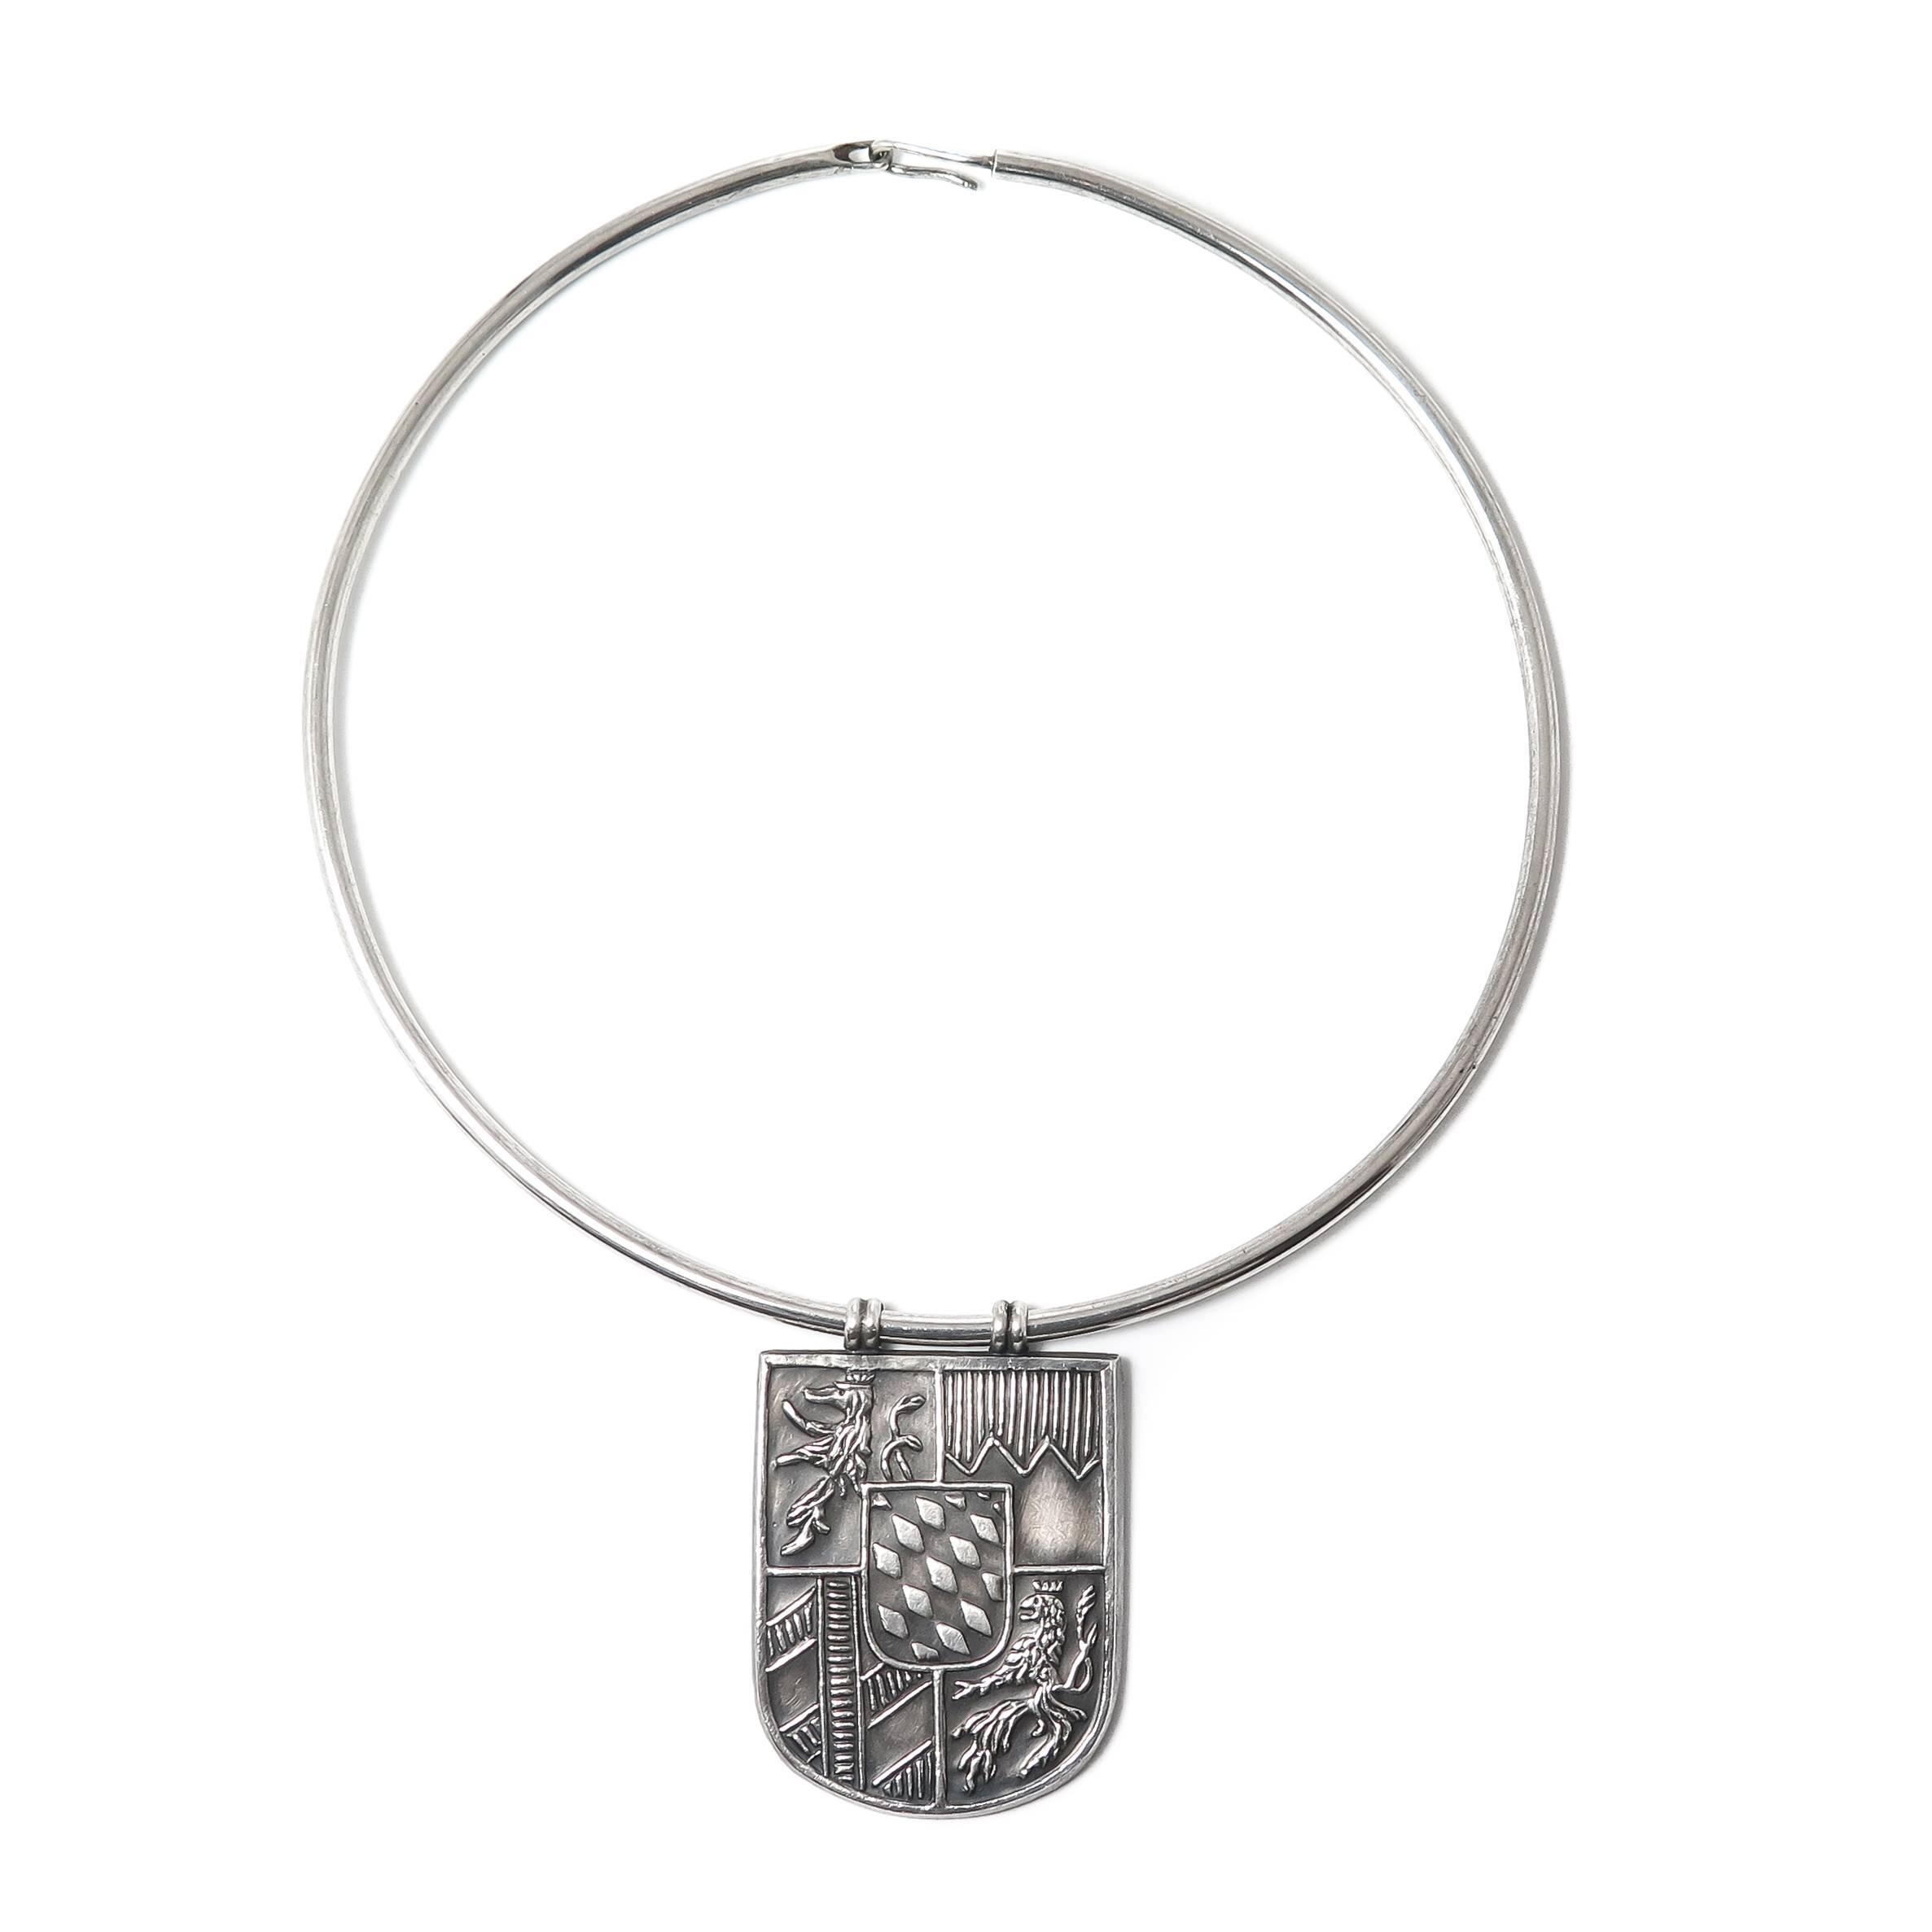 Circa 1970s Lalaounis Sterling Silver Shield pendant with Crest measuring 2 X 1 3/8 inch and suspended from a 3 MM thick Torque  style necklace measuring approximately 16 inch.